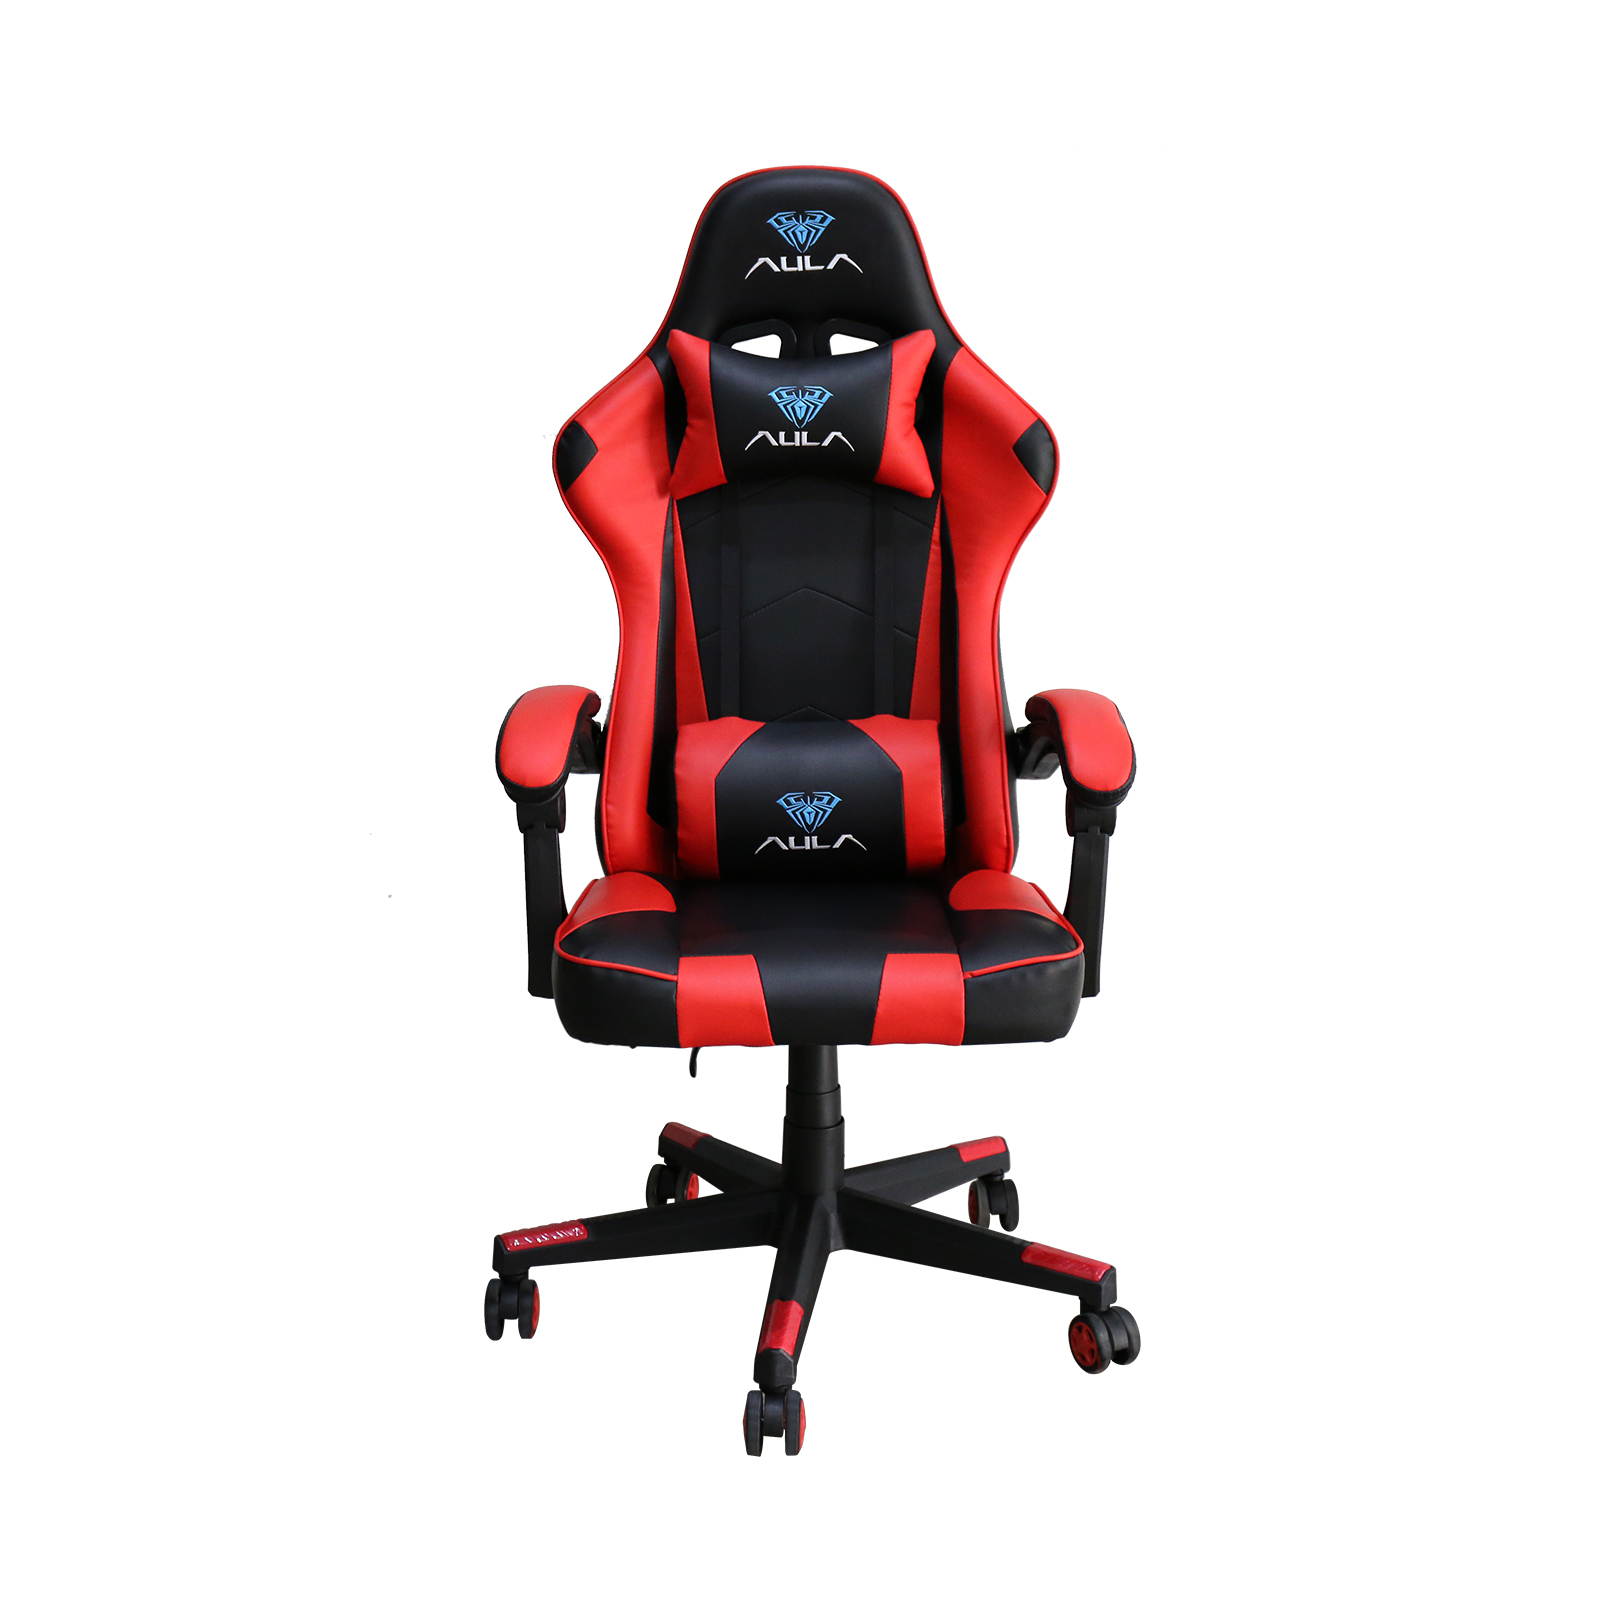 AULA F8093 Gaming Chair